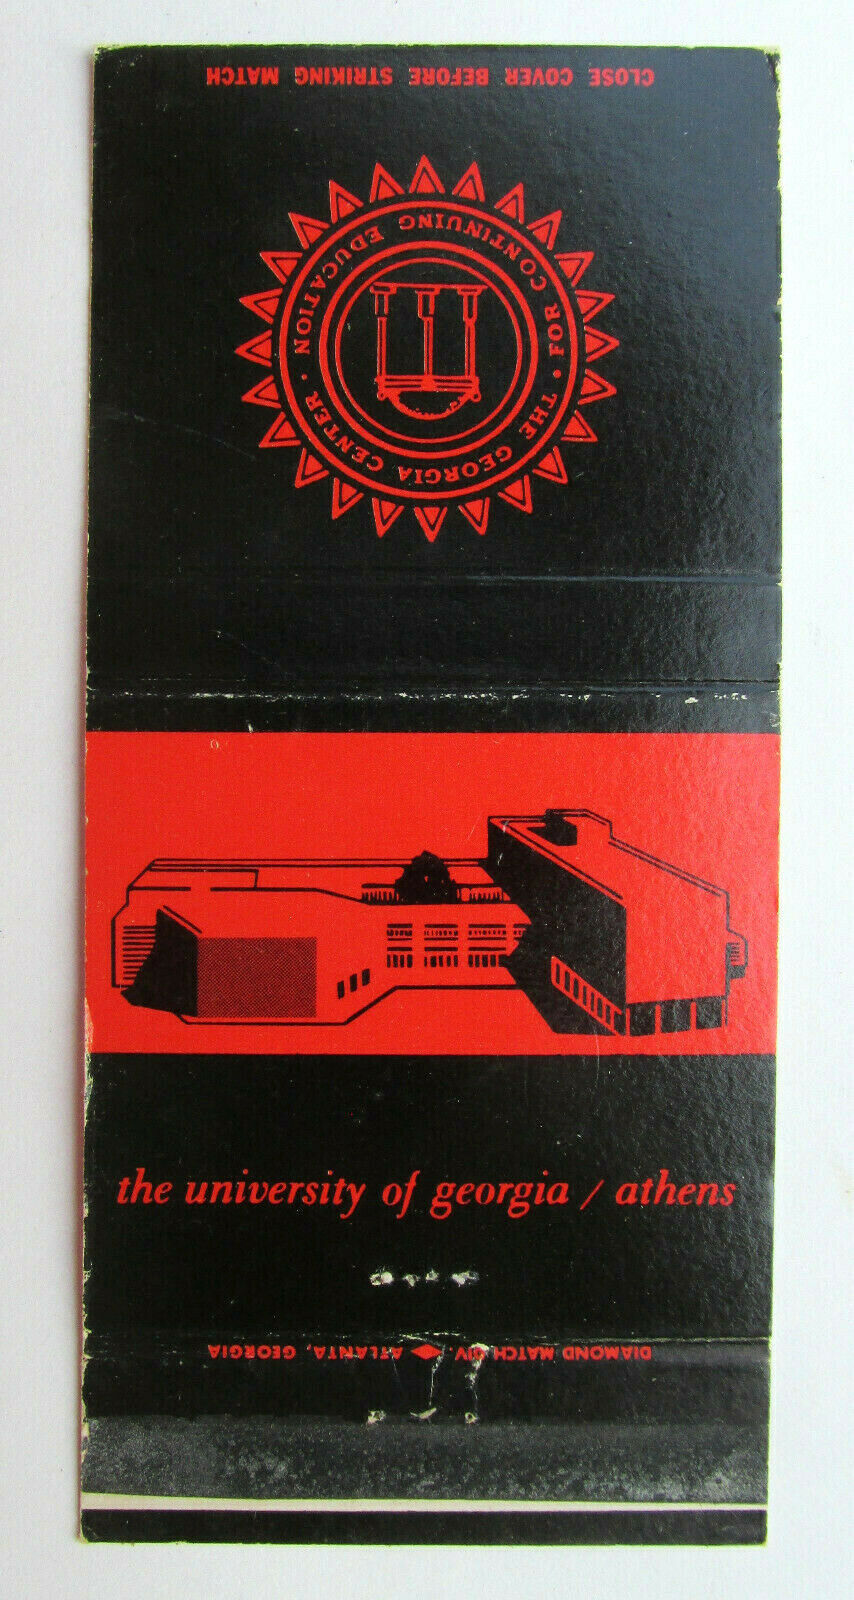 Primary image for University of Georgia / Athens - 30 Strike Matchbook Cover Continuing Education